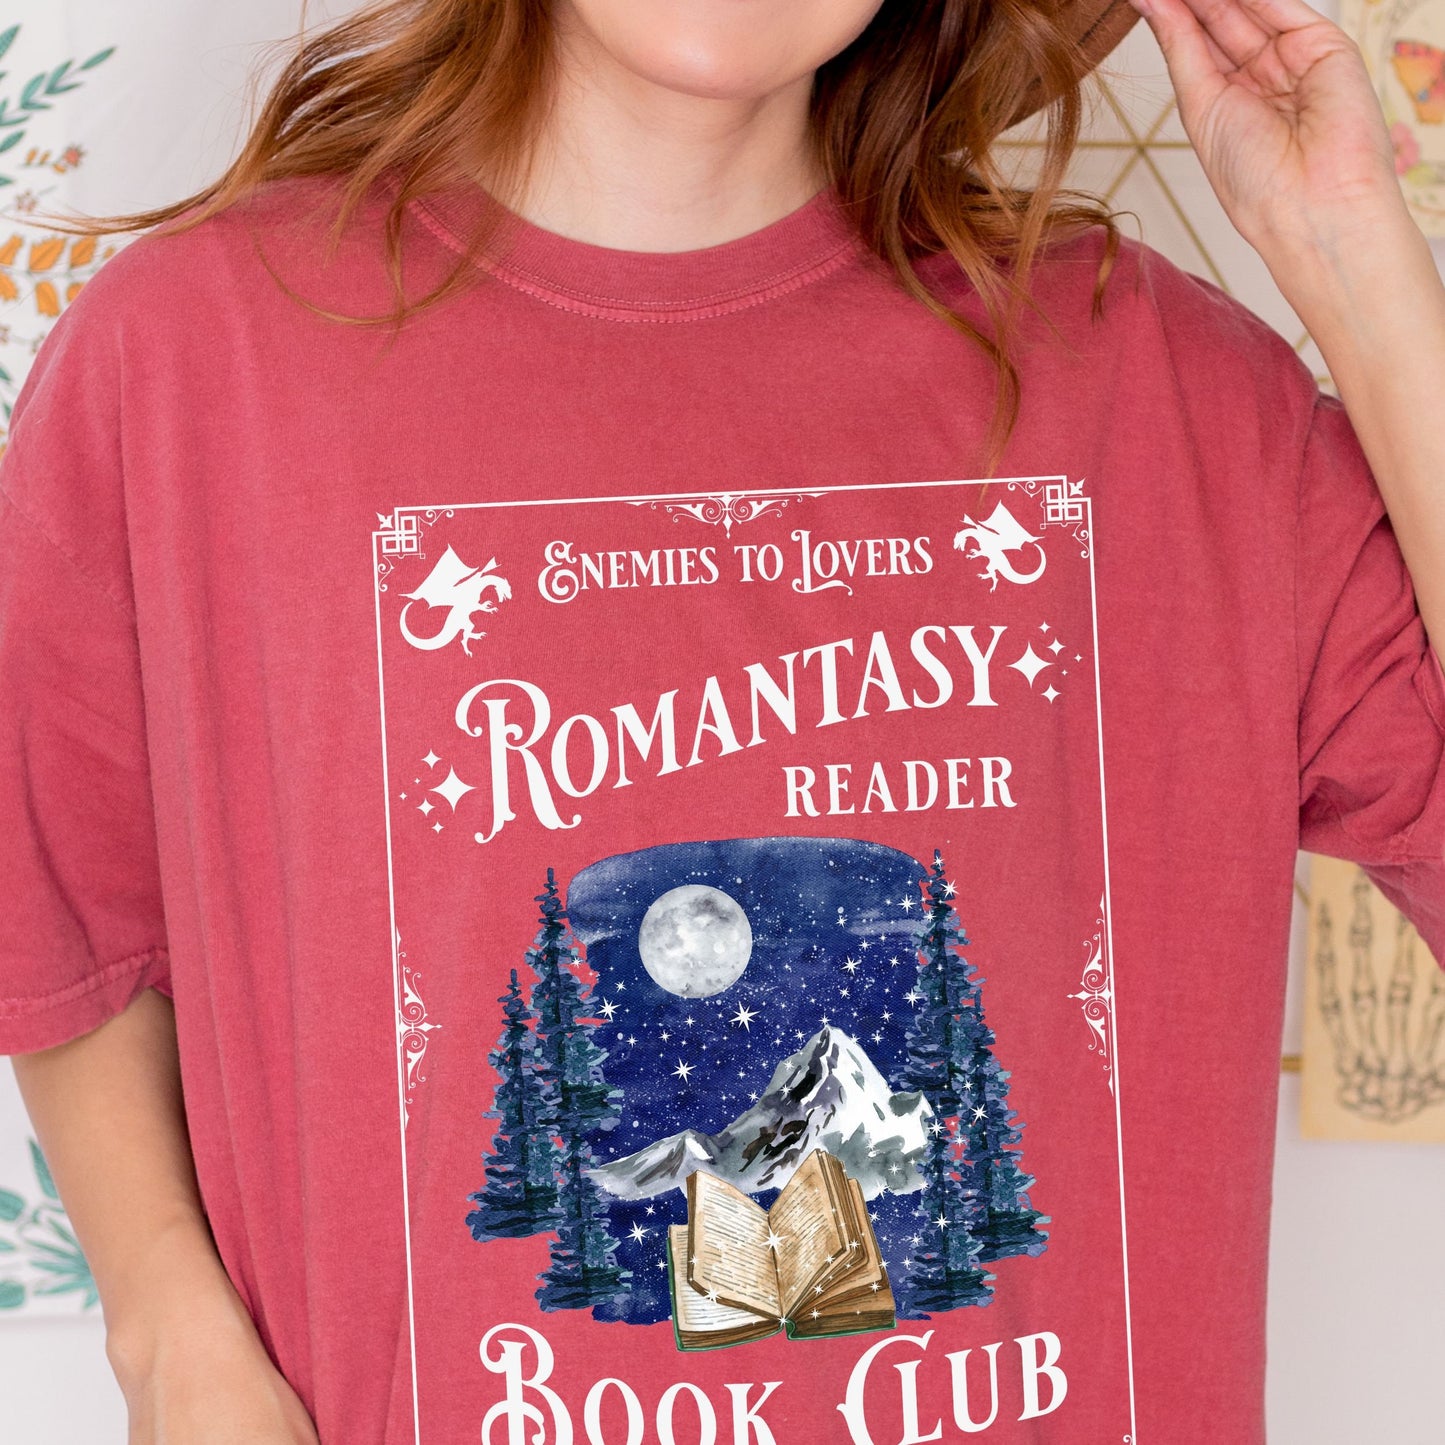 Romantasy Reader Book Club Shirt, Enemies To Lovers, Book Tropes Shirt, Booklover Gift, Spicy Book Fantasy Romance Bookish Things Smut Shirt